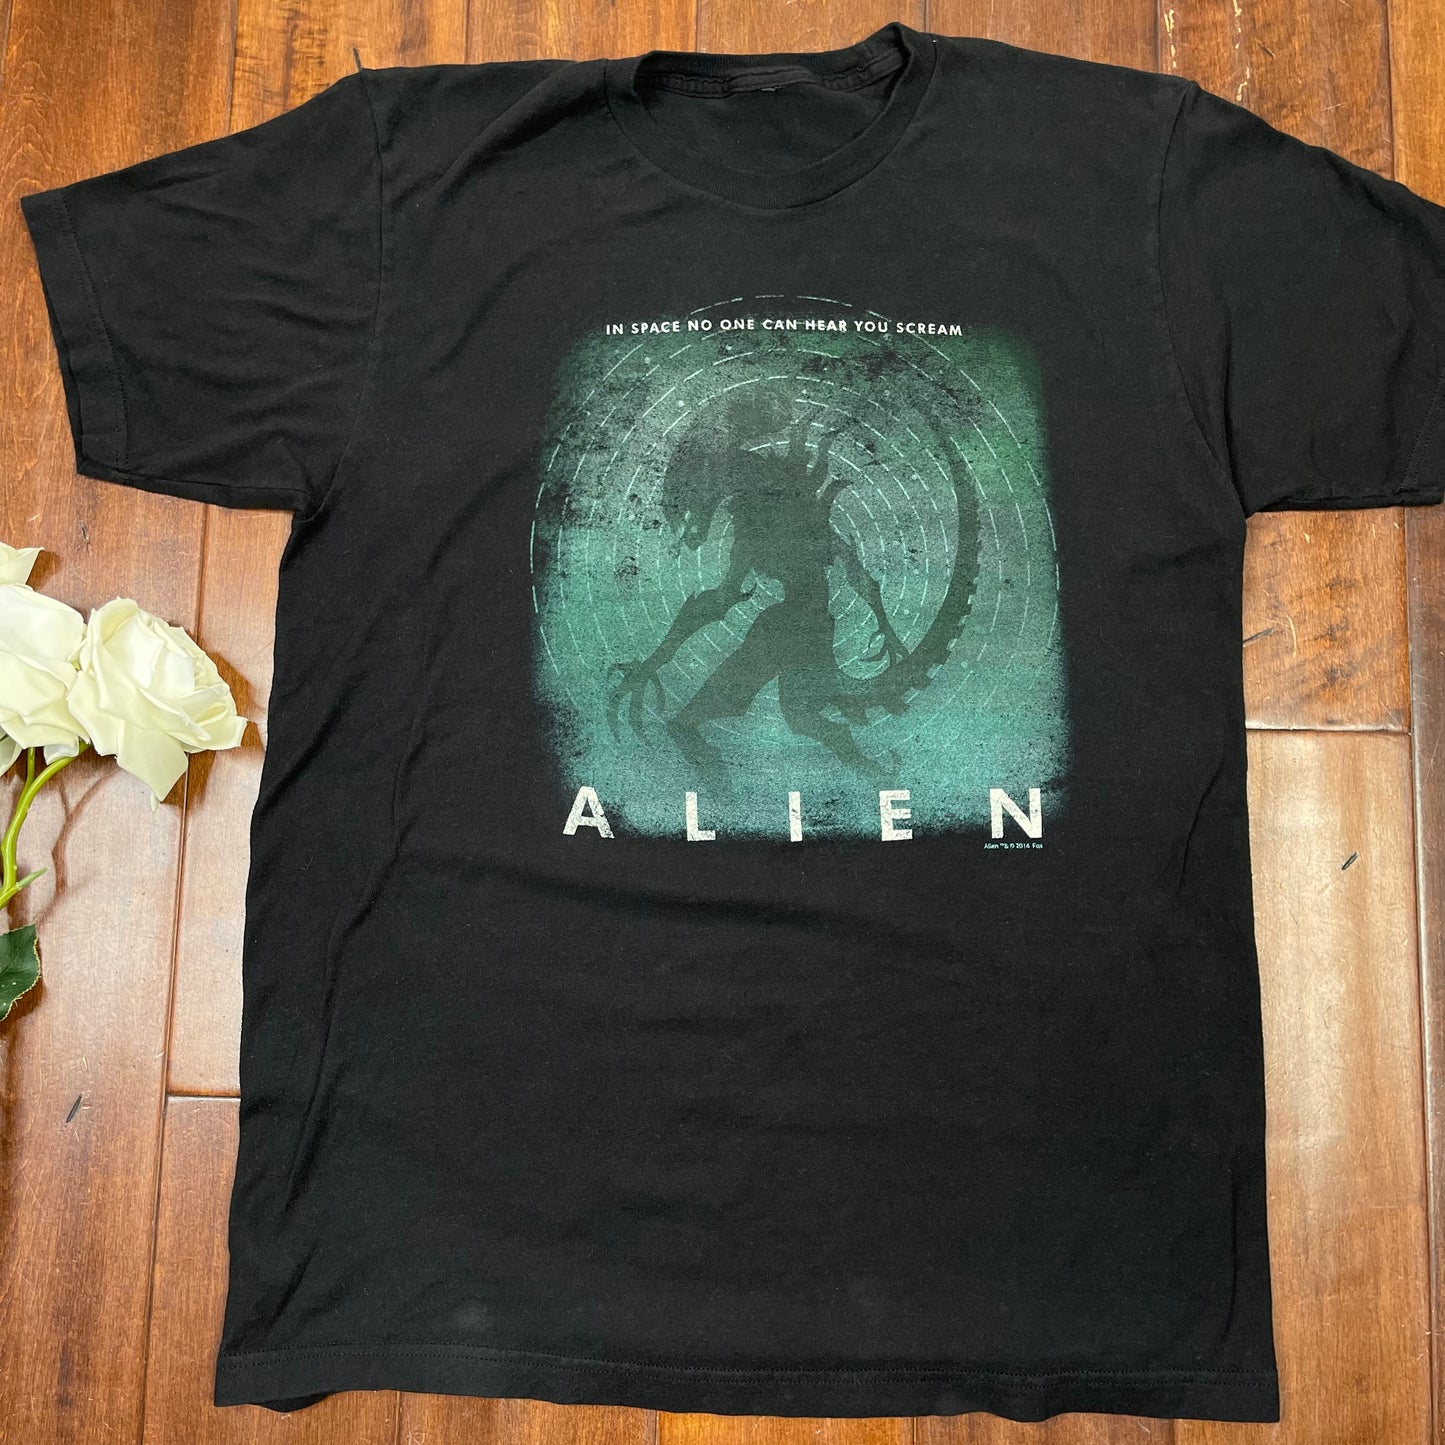 THRIFTED 2014 ALIEN “IN SPACE NO ONE CAN HEAR YOU SCREAM” T-SHIRT